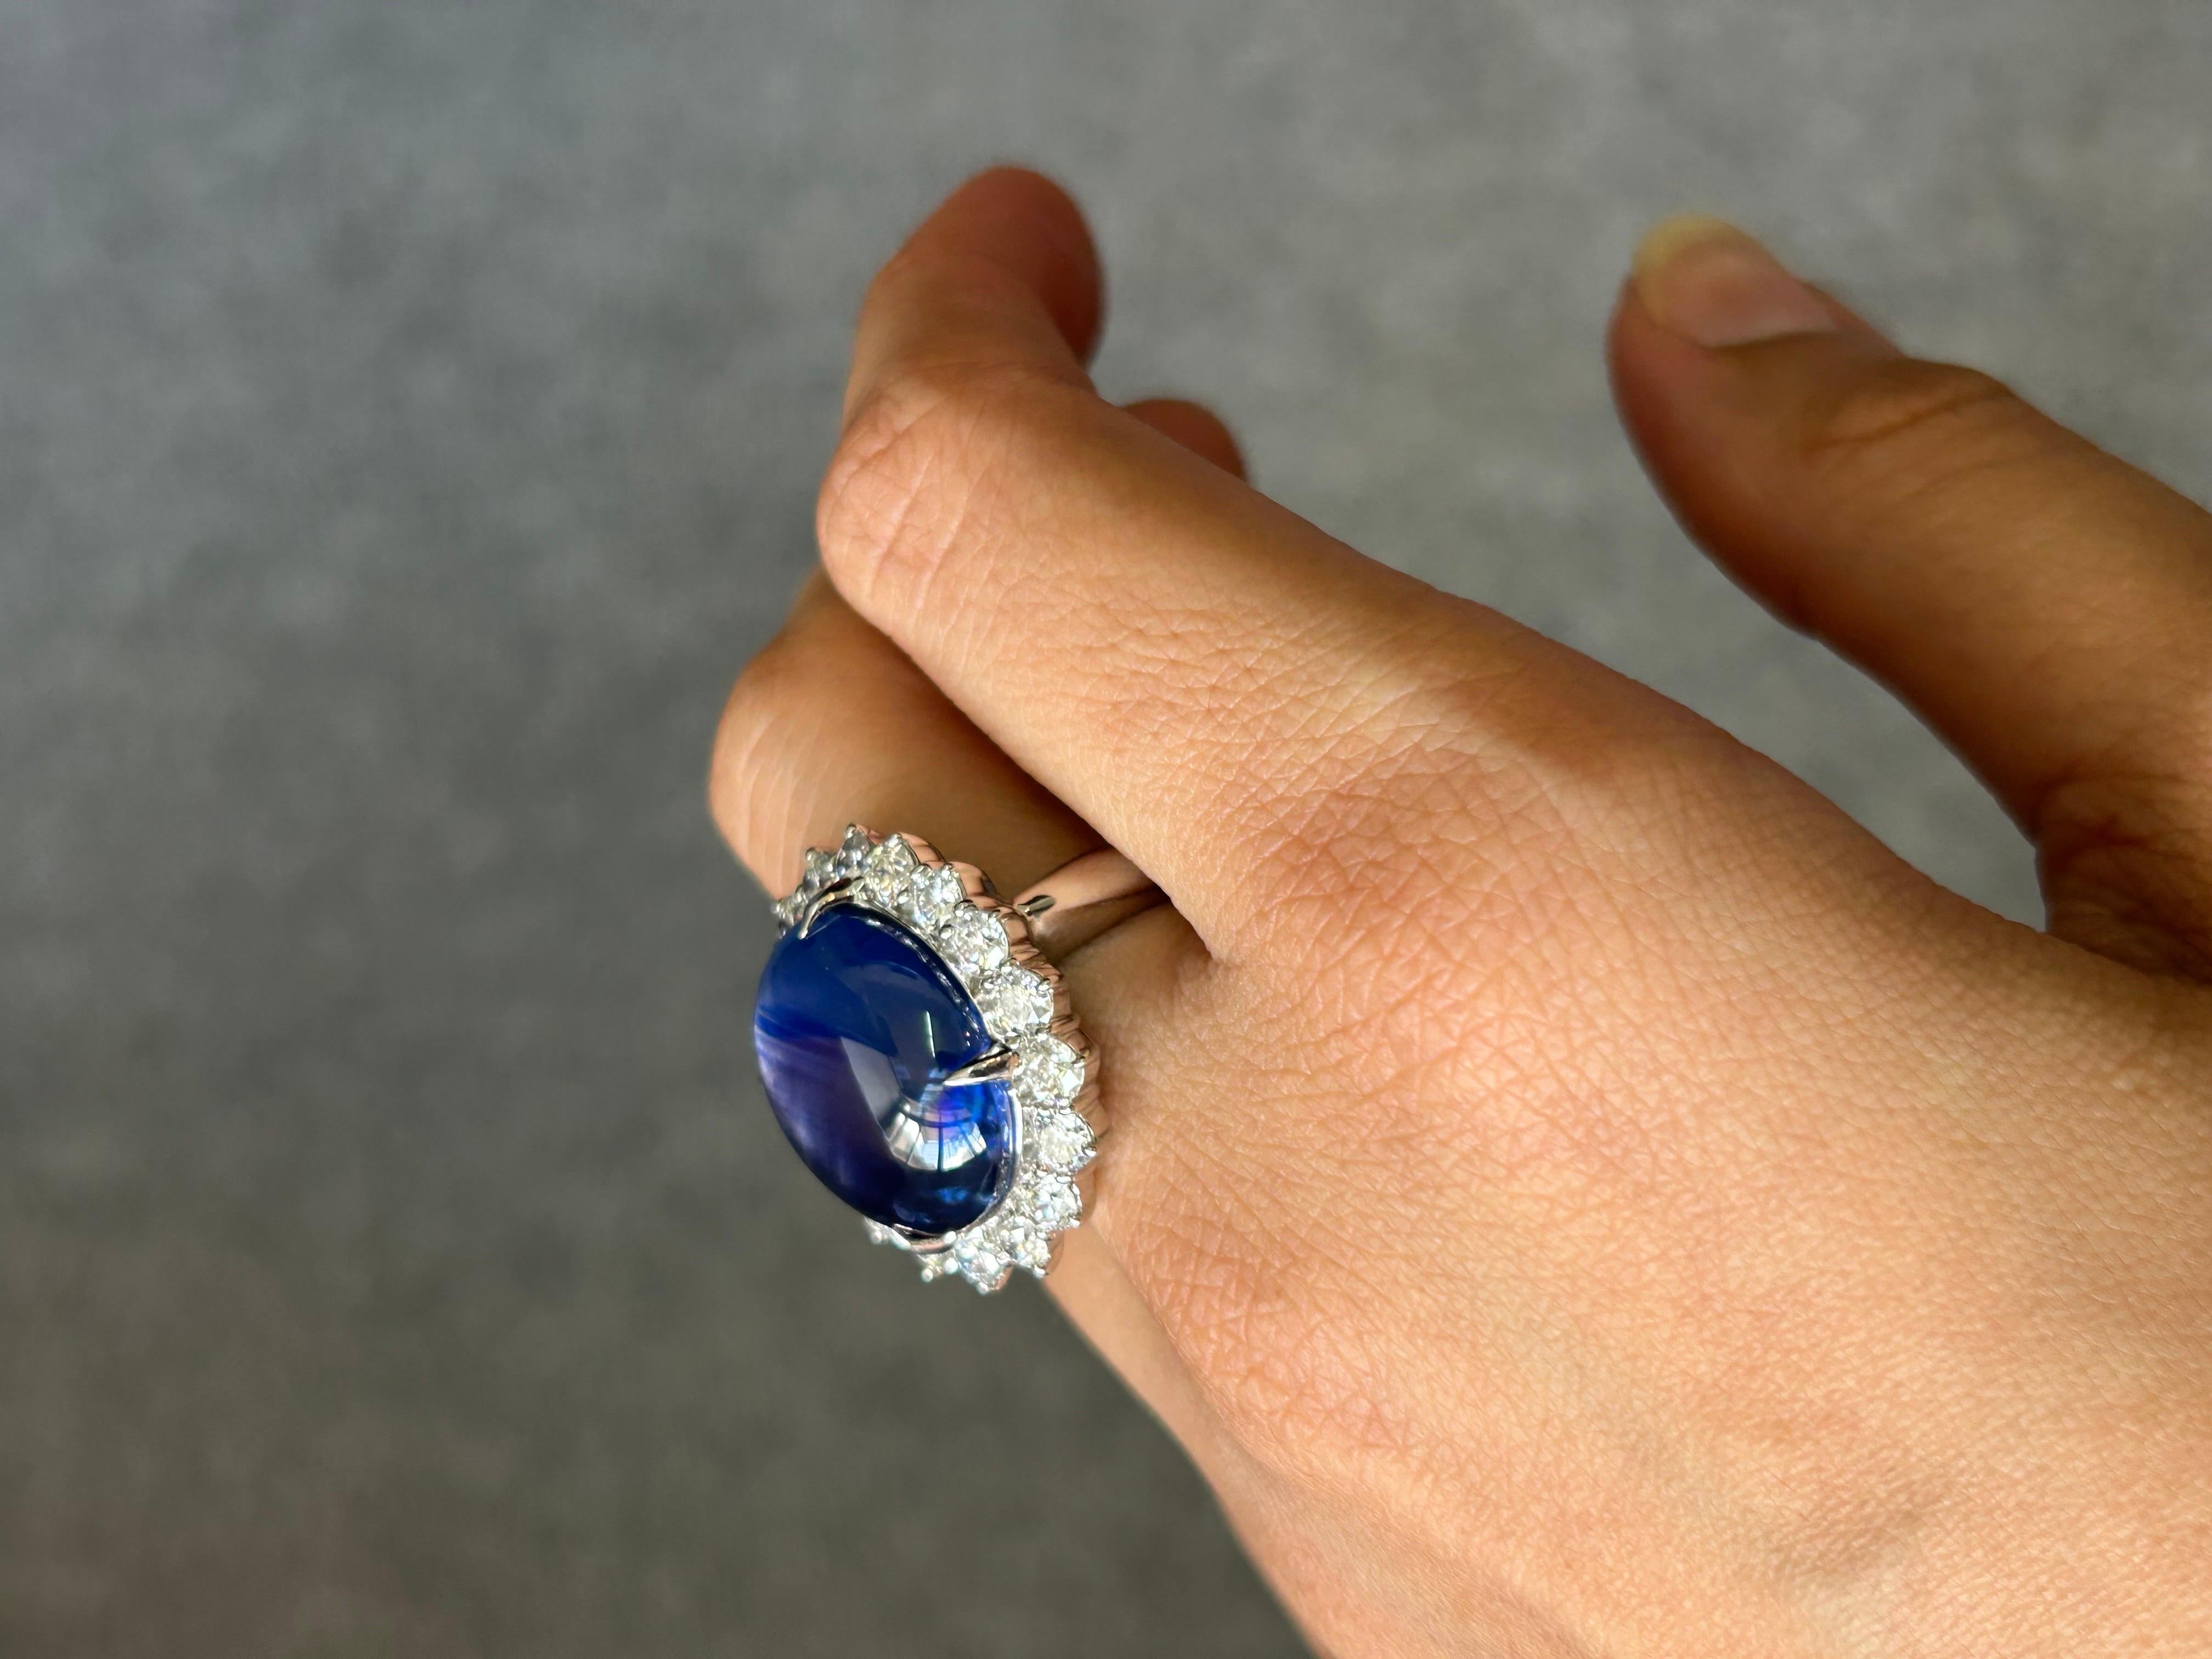 Cabochon 31.36 Carat Star Blue Sapphire and Diamond Ring  For Sale